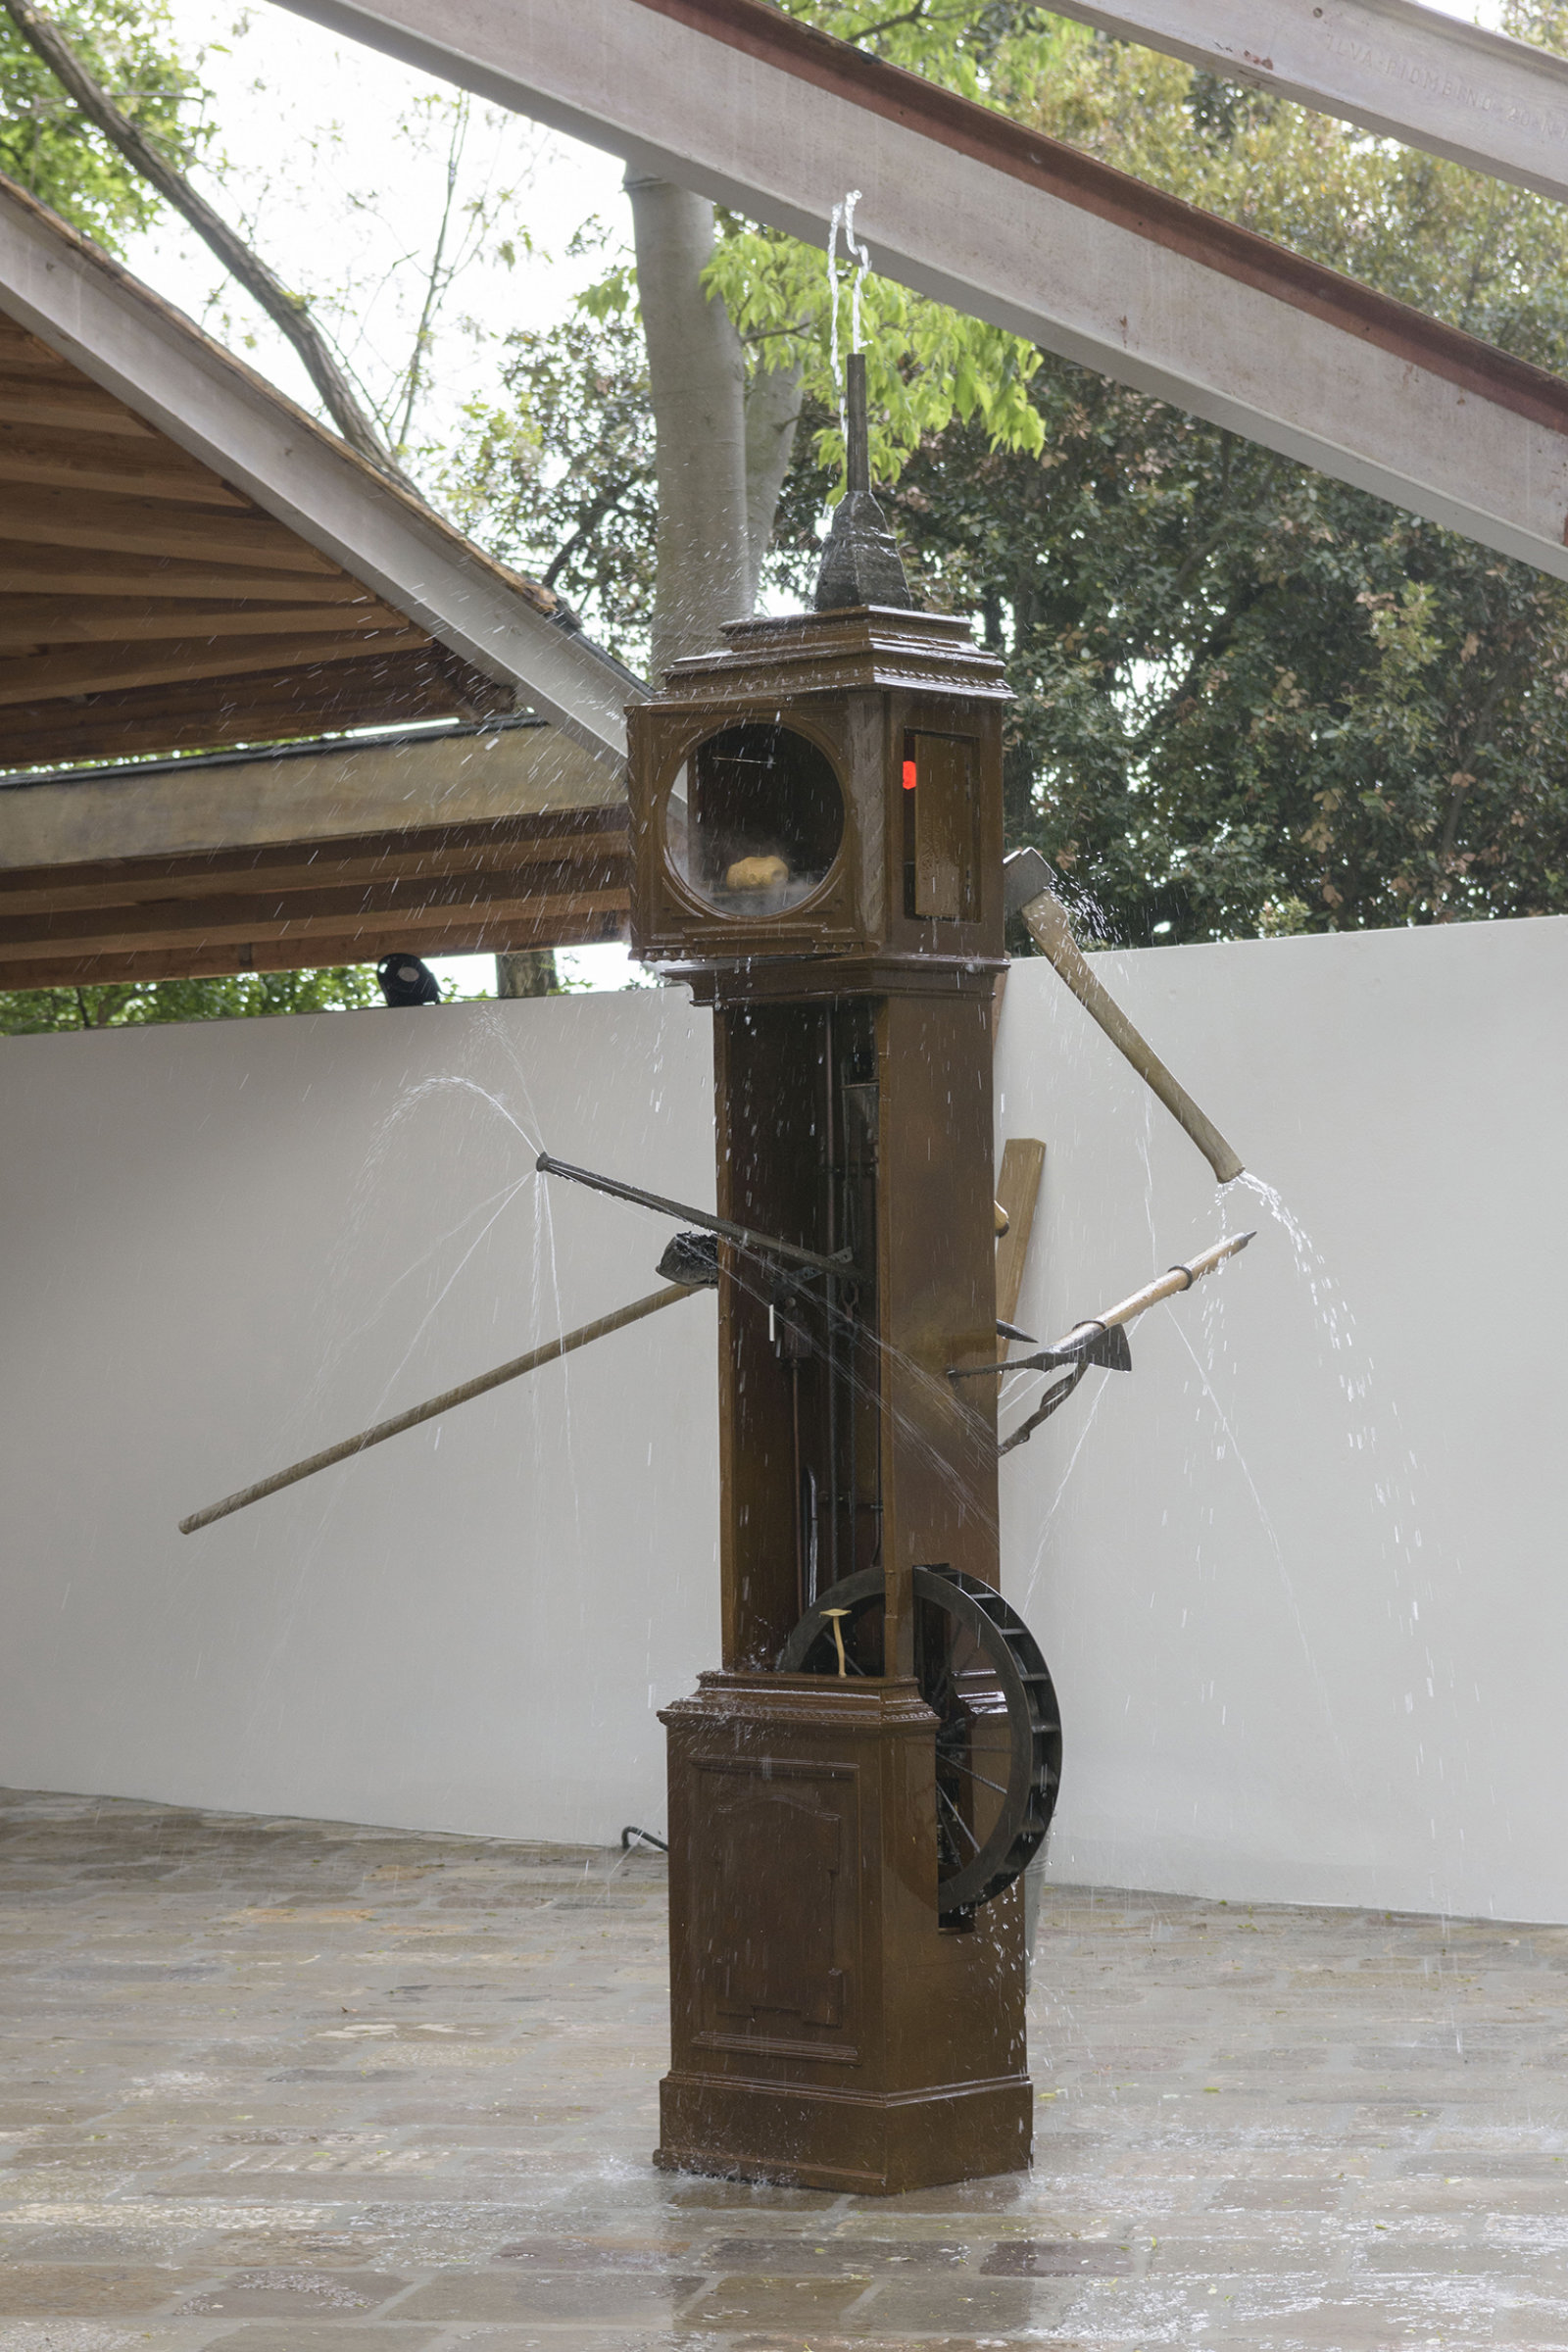 Geoffrey Farmer, Wounded Man, 2017, assembled cast bronze objects, waterworks, 118 x 20 x 20 in. (300 x 50 x 50 cm). Installation view, A way out of the mirror, Canada Pavilion, 57th Venice Biennale, Venice, Italy